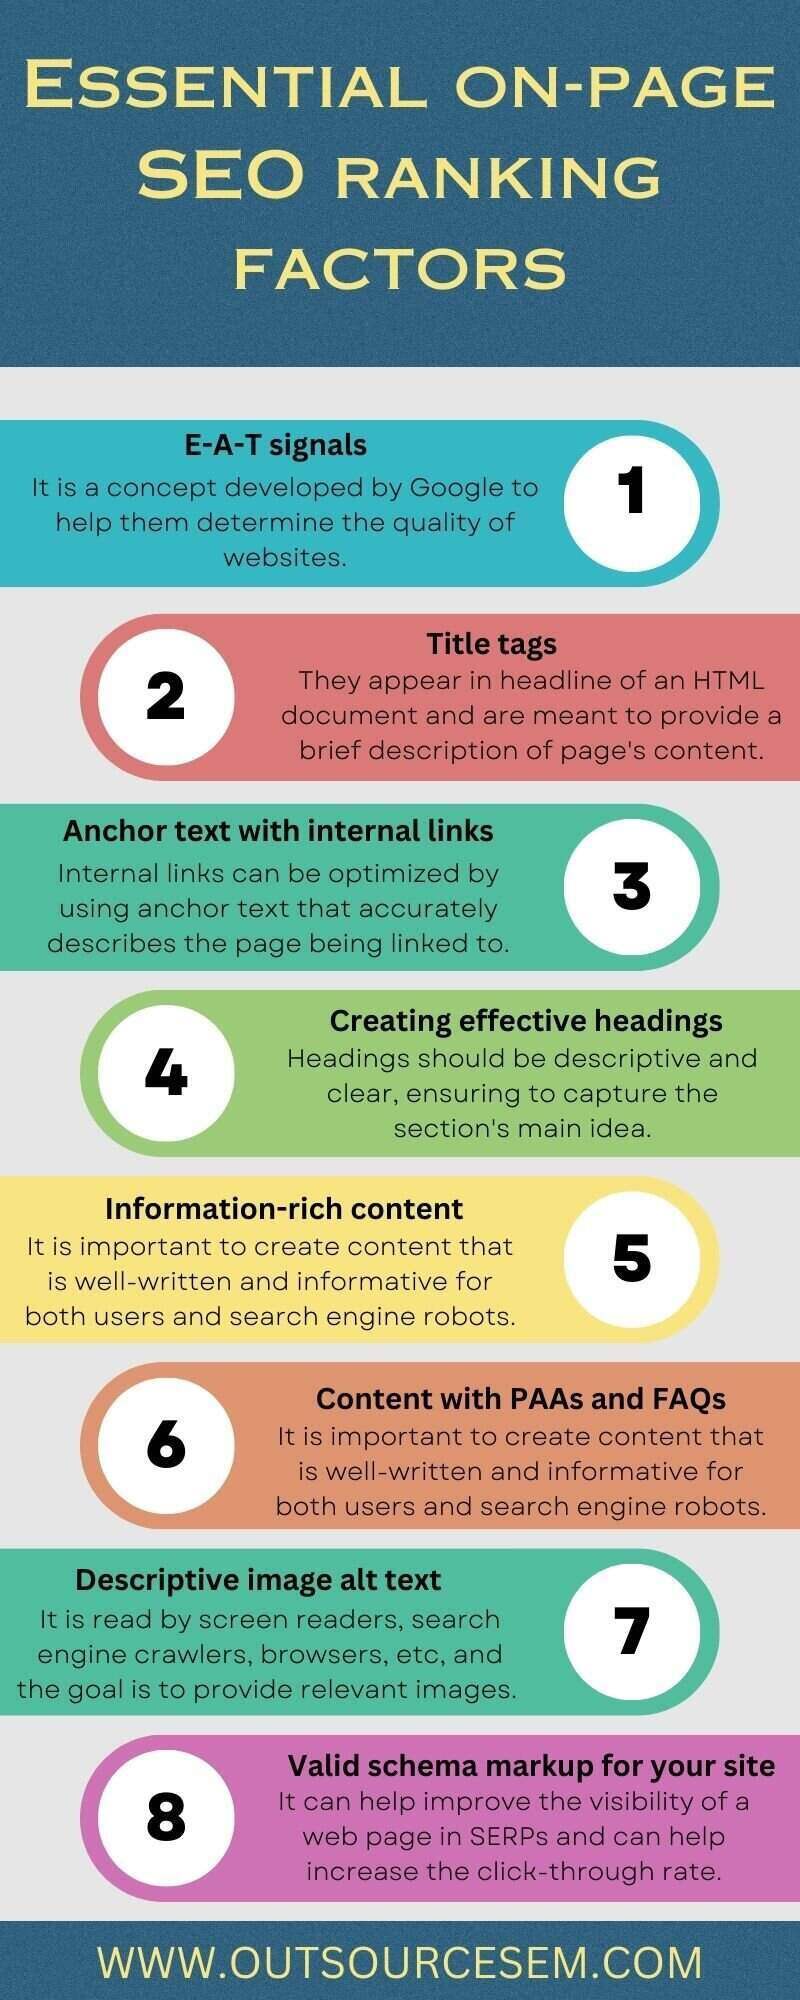 essential-on-page-seo-ranking-factors-infographic